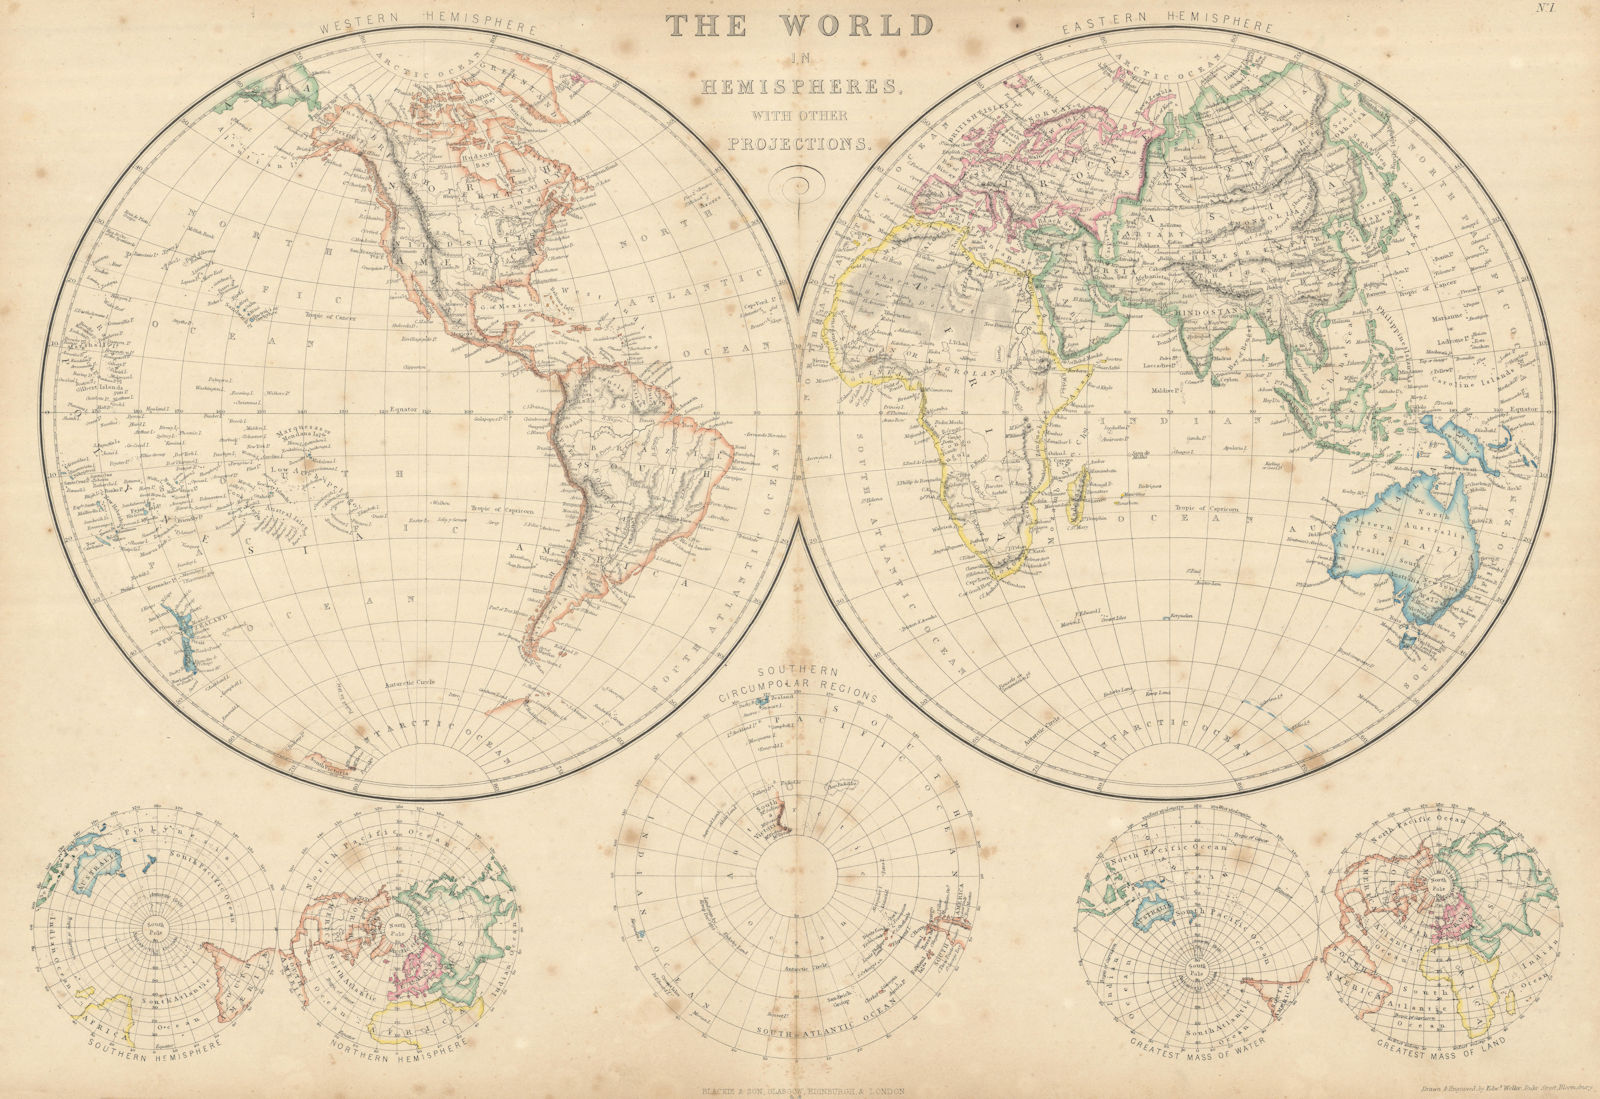 The World in Hemispheres with Other Projections by Edward Weller 1860 old map